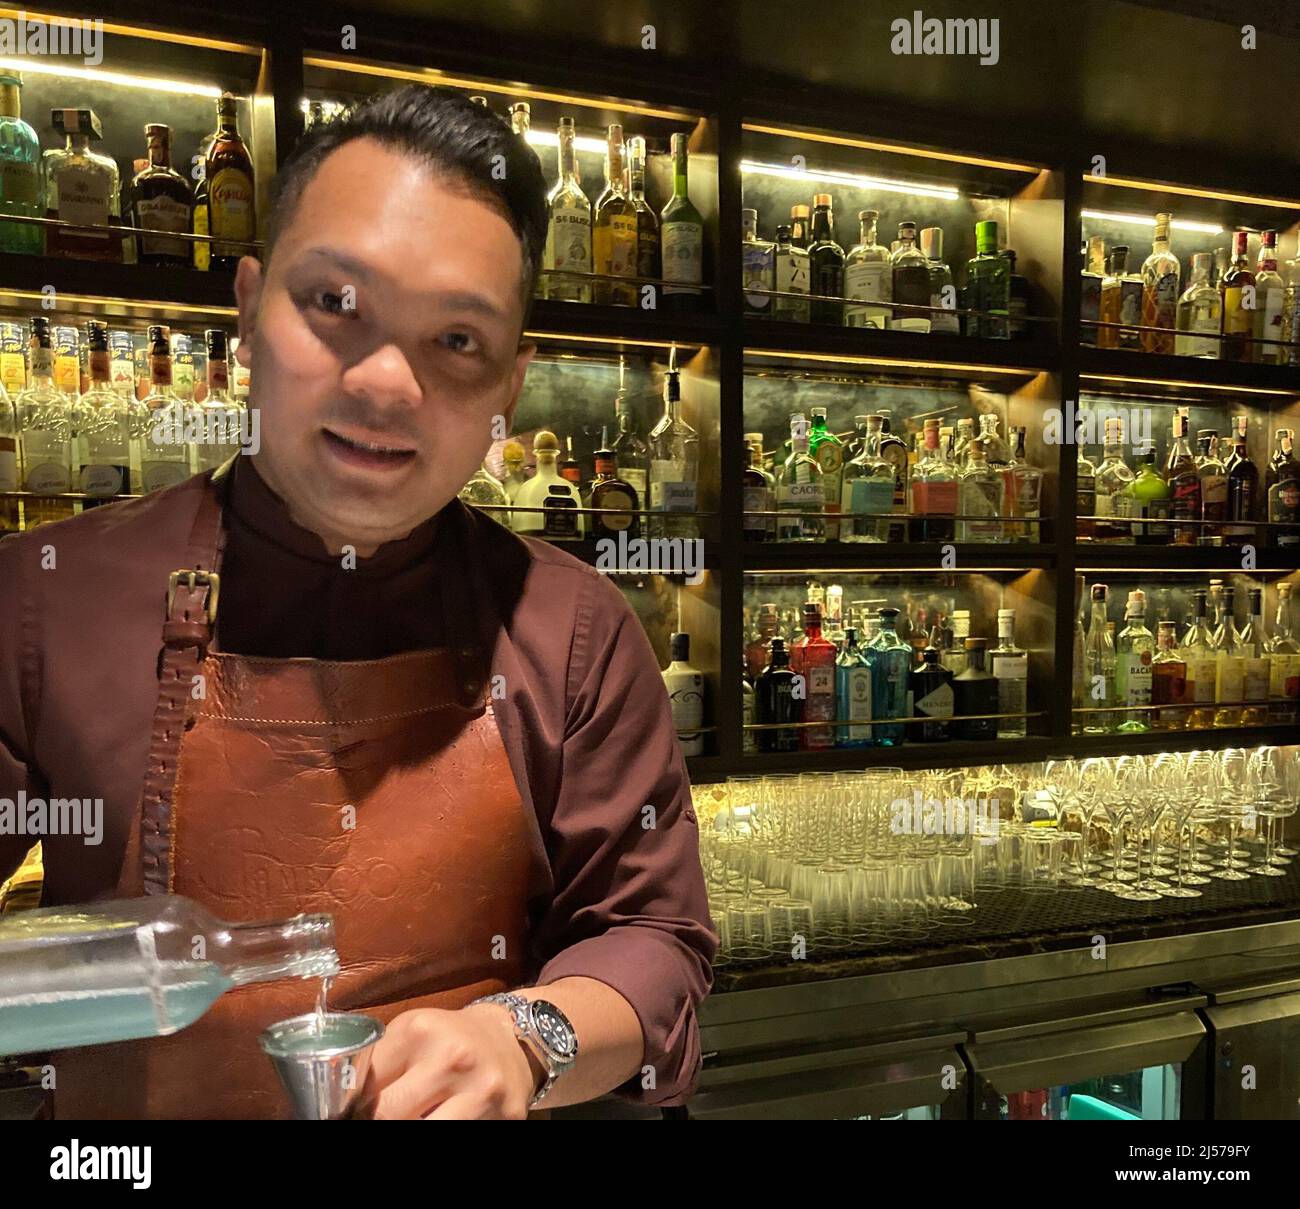 Bangkok, Thailand. 18th Apr, 2022. Chanakan Thaoanon, head bartender at Bamboo Bar in the Mandarin Oriental Hotel, mixes a 'Life's a Beach' cocktail from the new menu. Bartenders today are creating innovative cocktails with flavors that offer unforgettable taste experiences - and ingredients you wouldn't expect to find in drinks. Mixology is both art and science. (to dpa 'The essence of stones: How mixology is revolutionizing bar culture') Credit: Carola Frentzen/dpa/Alamy Live News Stock Photo